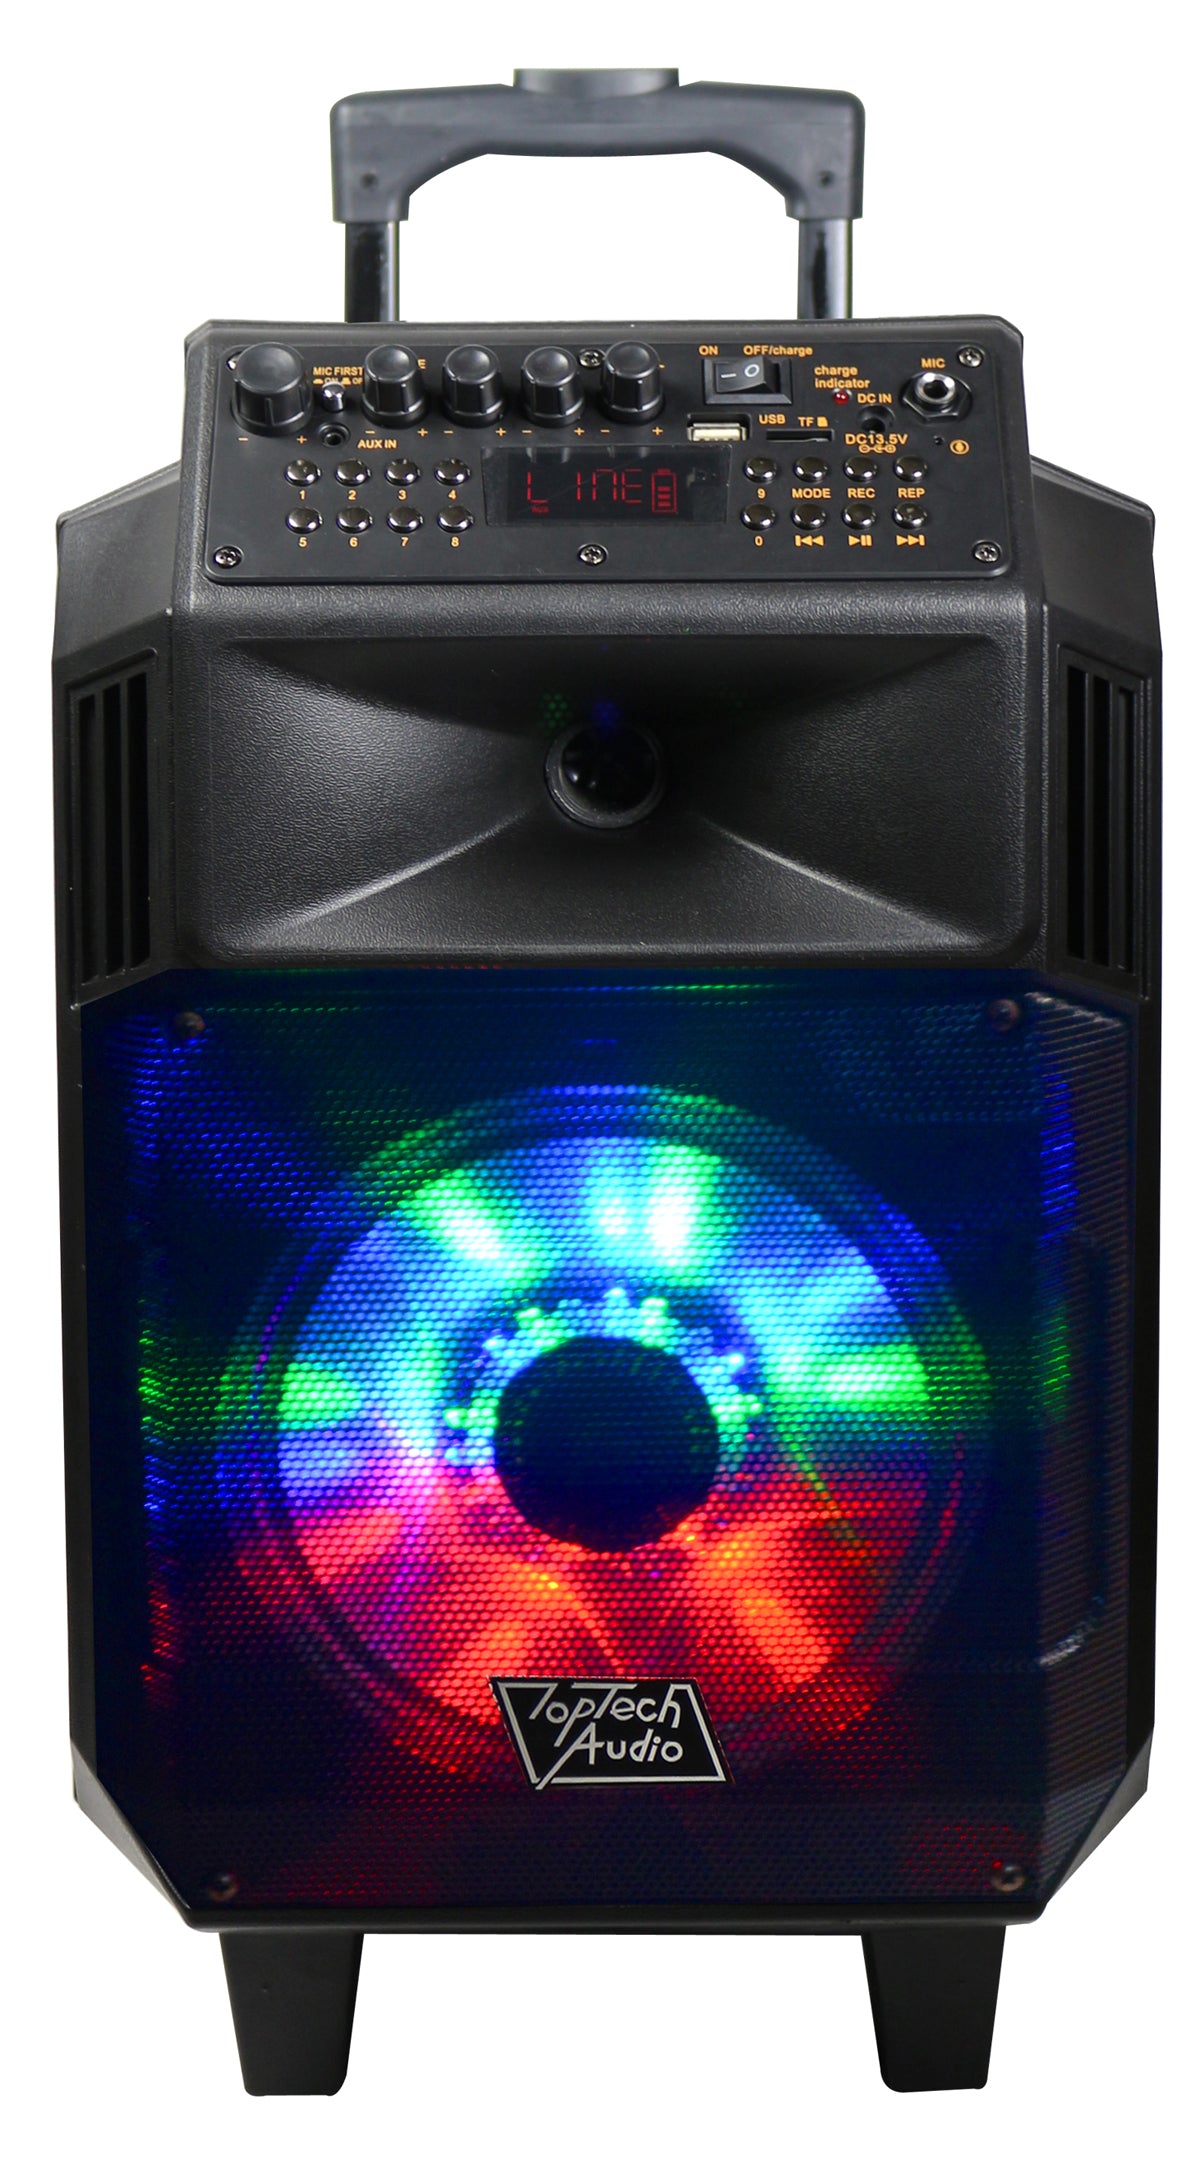 Fully Amplified Portable 1300 Watts Peak Power 8” Speaker with LED LIGHT